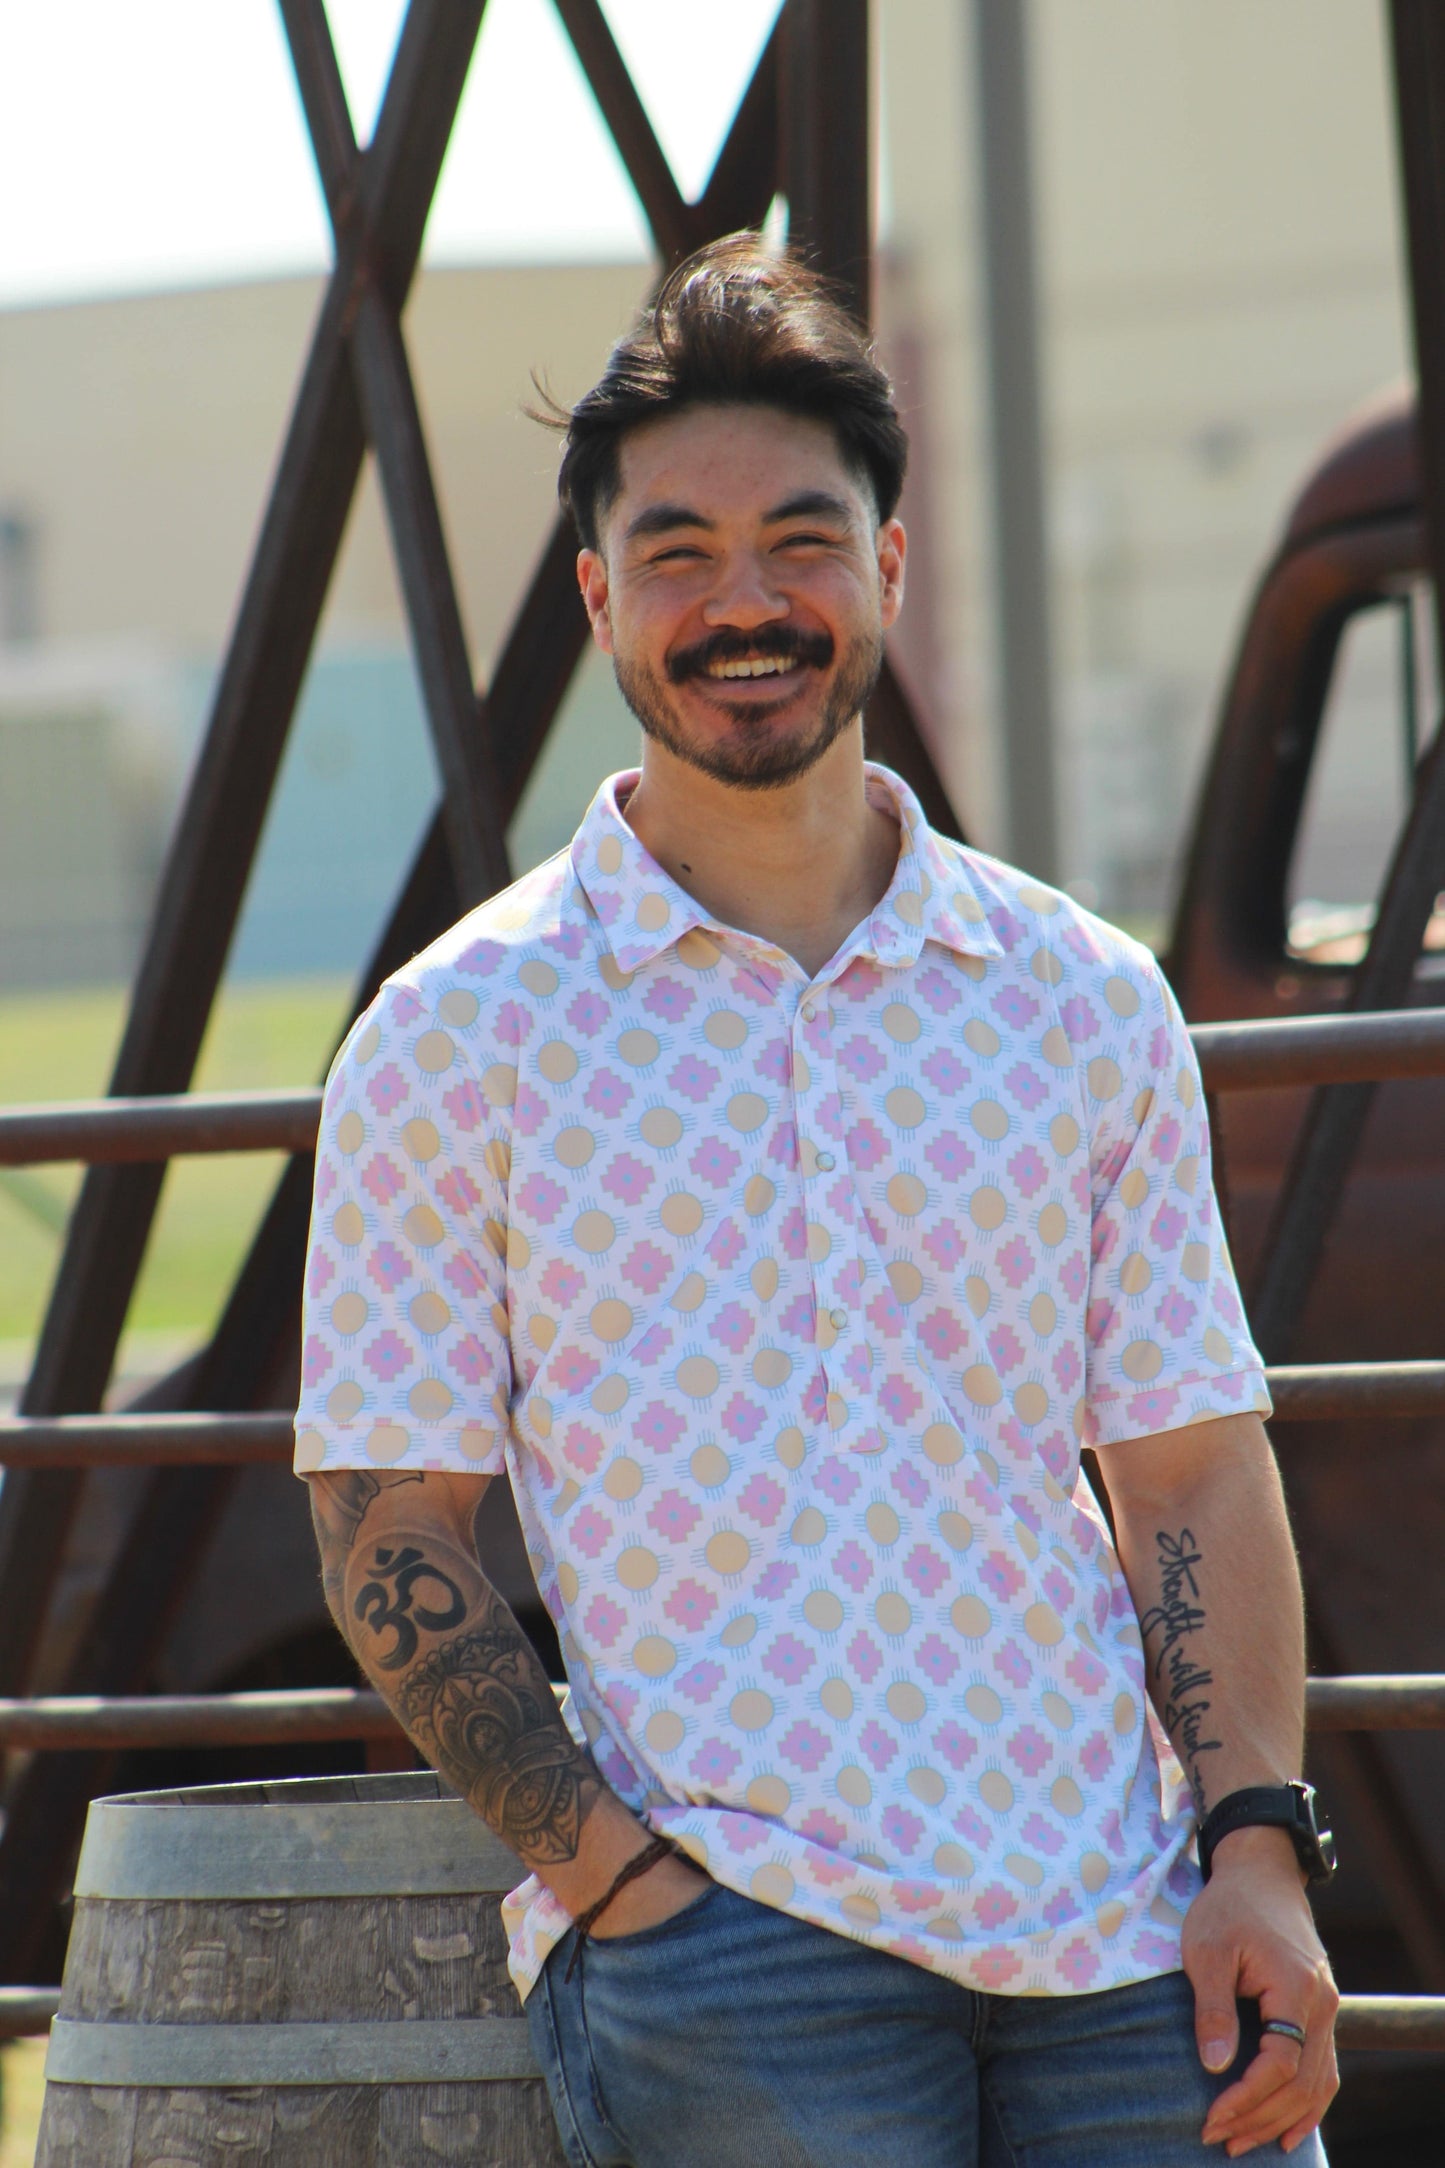 A man with a warm smile is casually leaning on a wooden barrel, wearing the Sunset Crossroads shirt from HowdyHo. The shirt boasts a soft pattern of yellow suns and pink crosses on a light background, creating a fun and fresh look. His relaxed pose, paired with jeans and a stylish watch, captures the essence of HowdyHo's blend of comfort and trendy design.